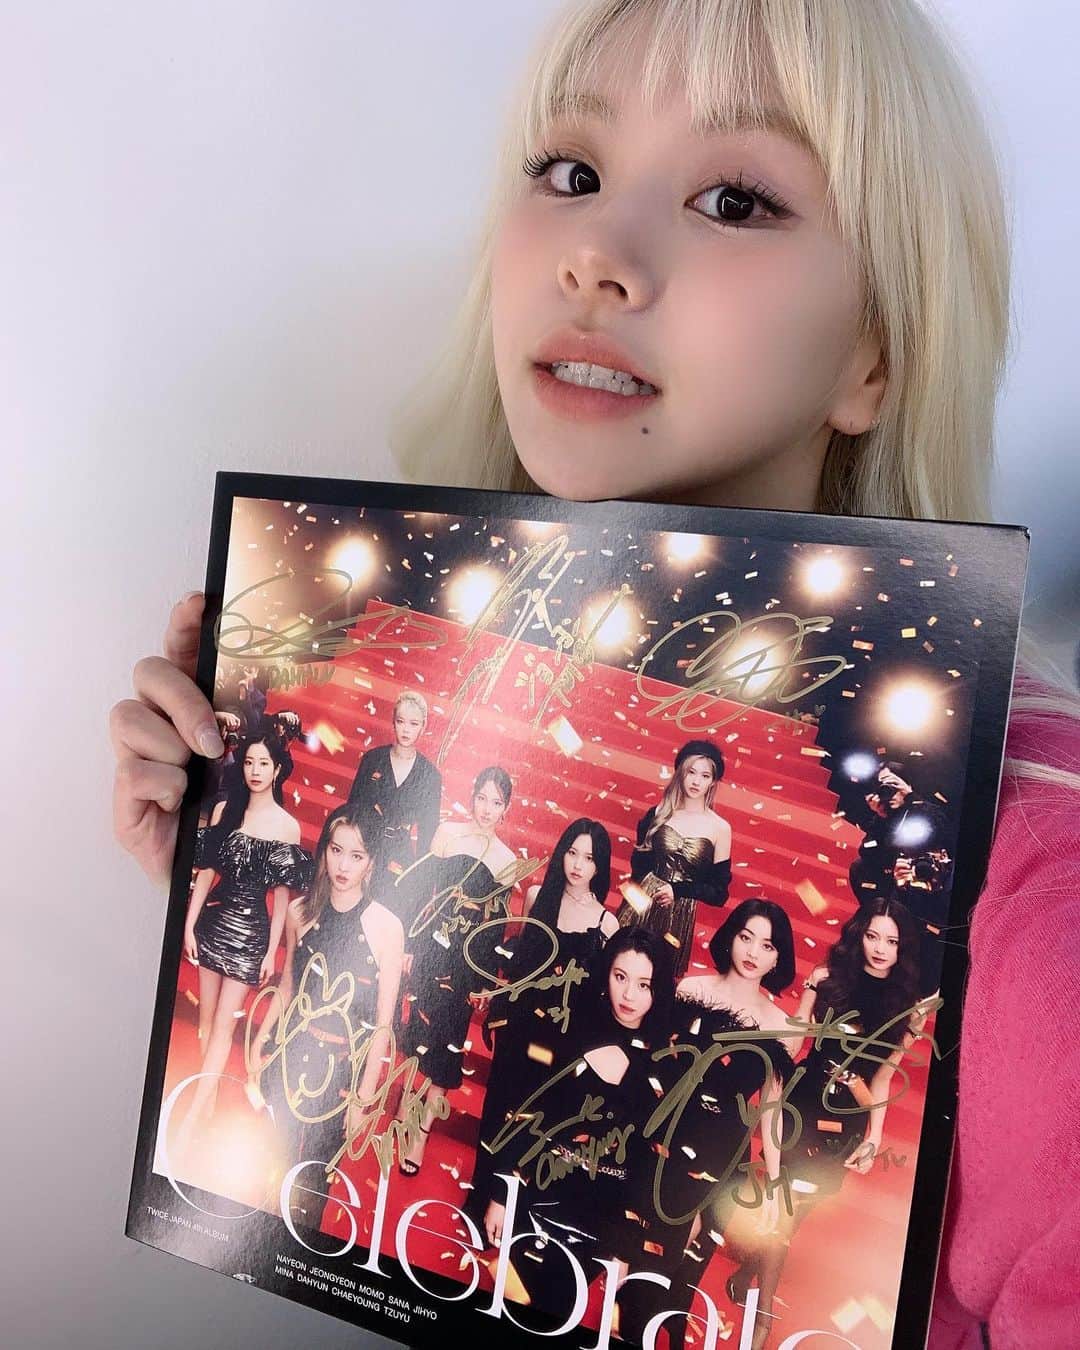 TWICE JAPANのインスタグラム：「2022.12.28 TWICE JAPAN 4th ALBUM『Celebrate』数量限定生産アナログ盤　発売記念   CHAEYOUNG   https://twicejapan.com/news/detail/1110   #TWICE #Celebrate #VINYL #CHAEYOUNG #TWICE_JAPANDEBUT5thAnniversary」